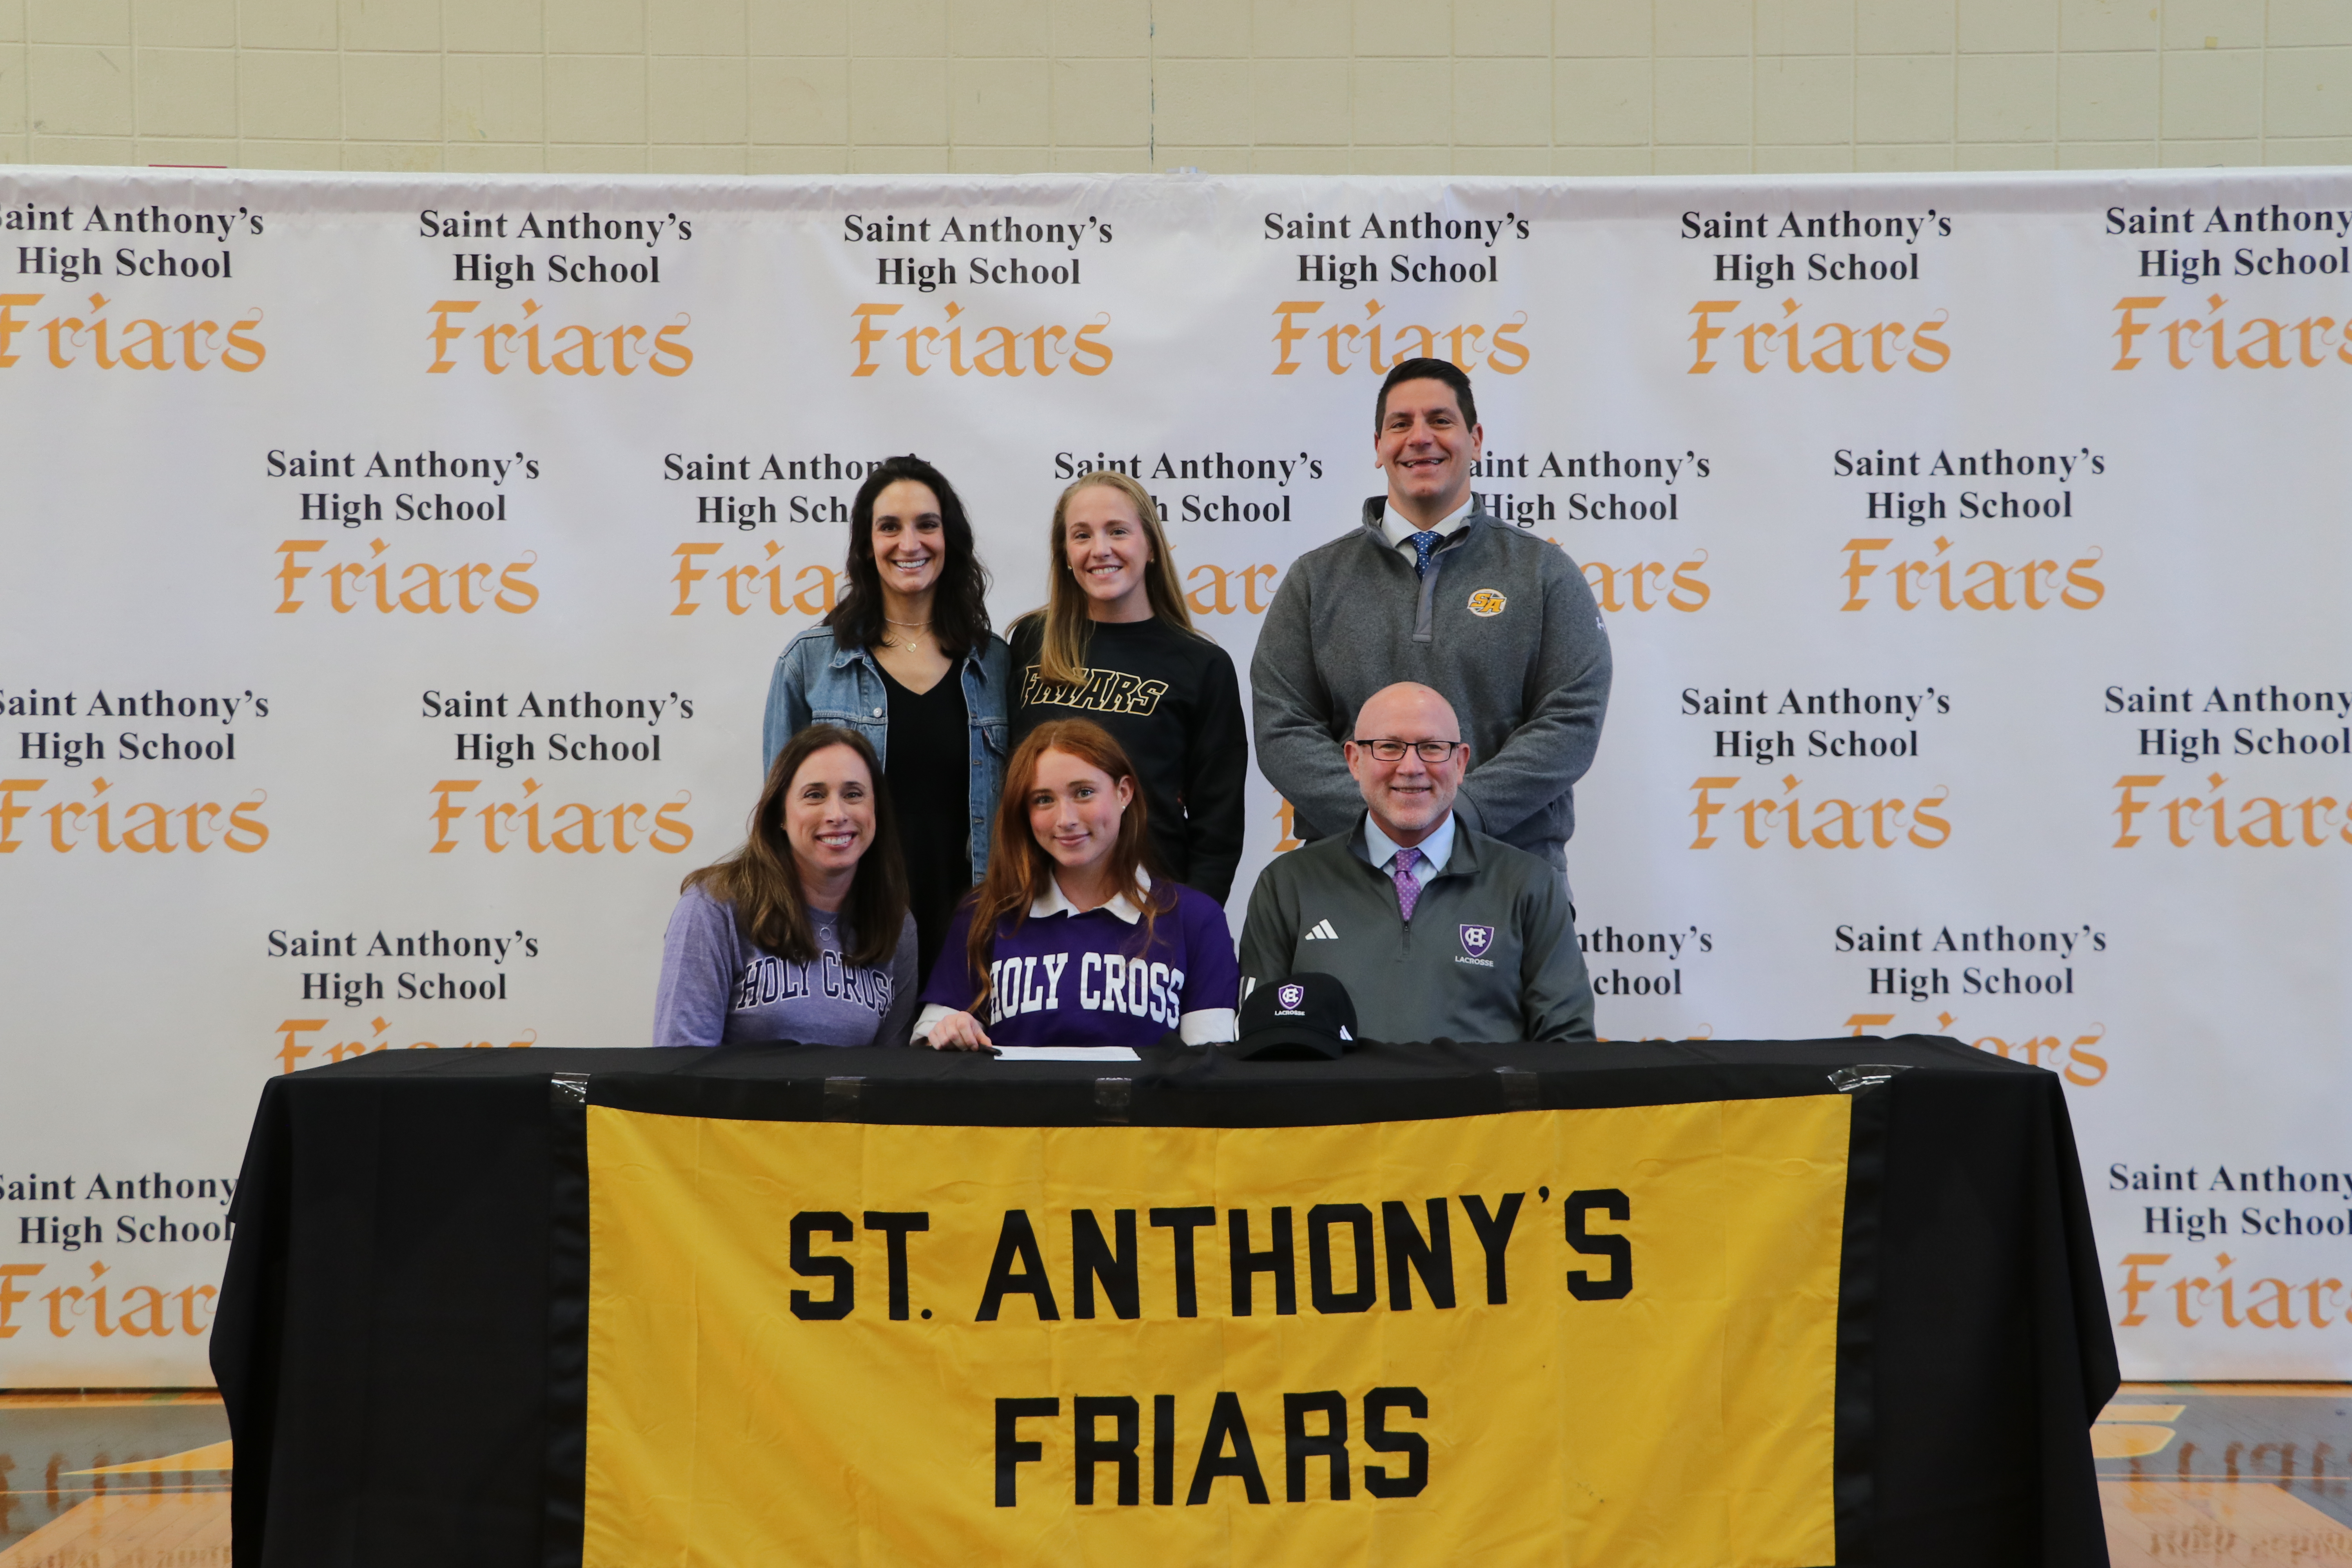 Holly Hardwick committed to the College of Holy Cross- CONGRATULATIONS